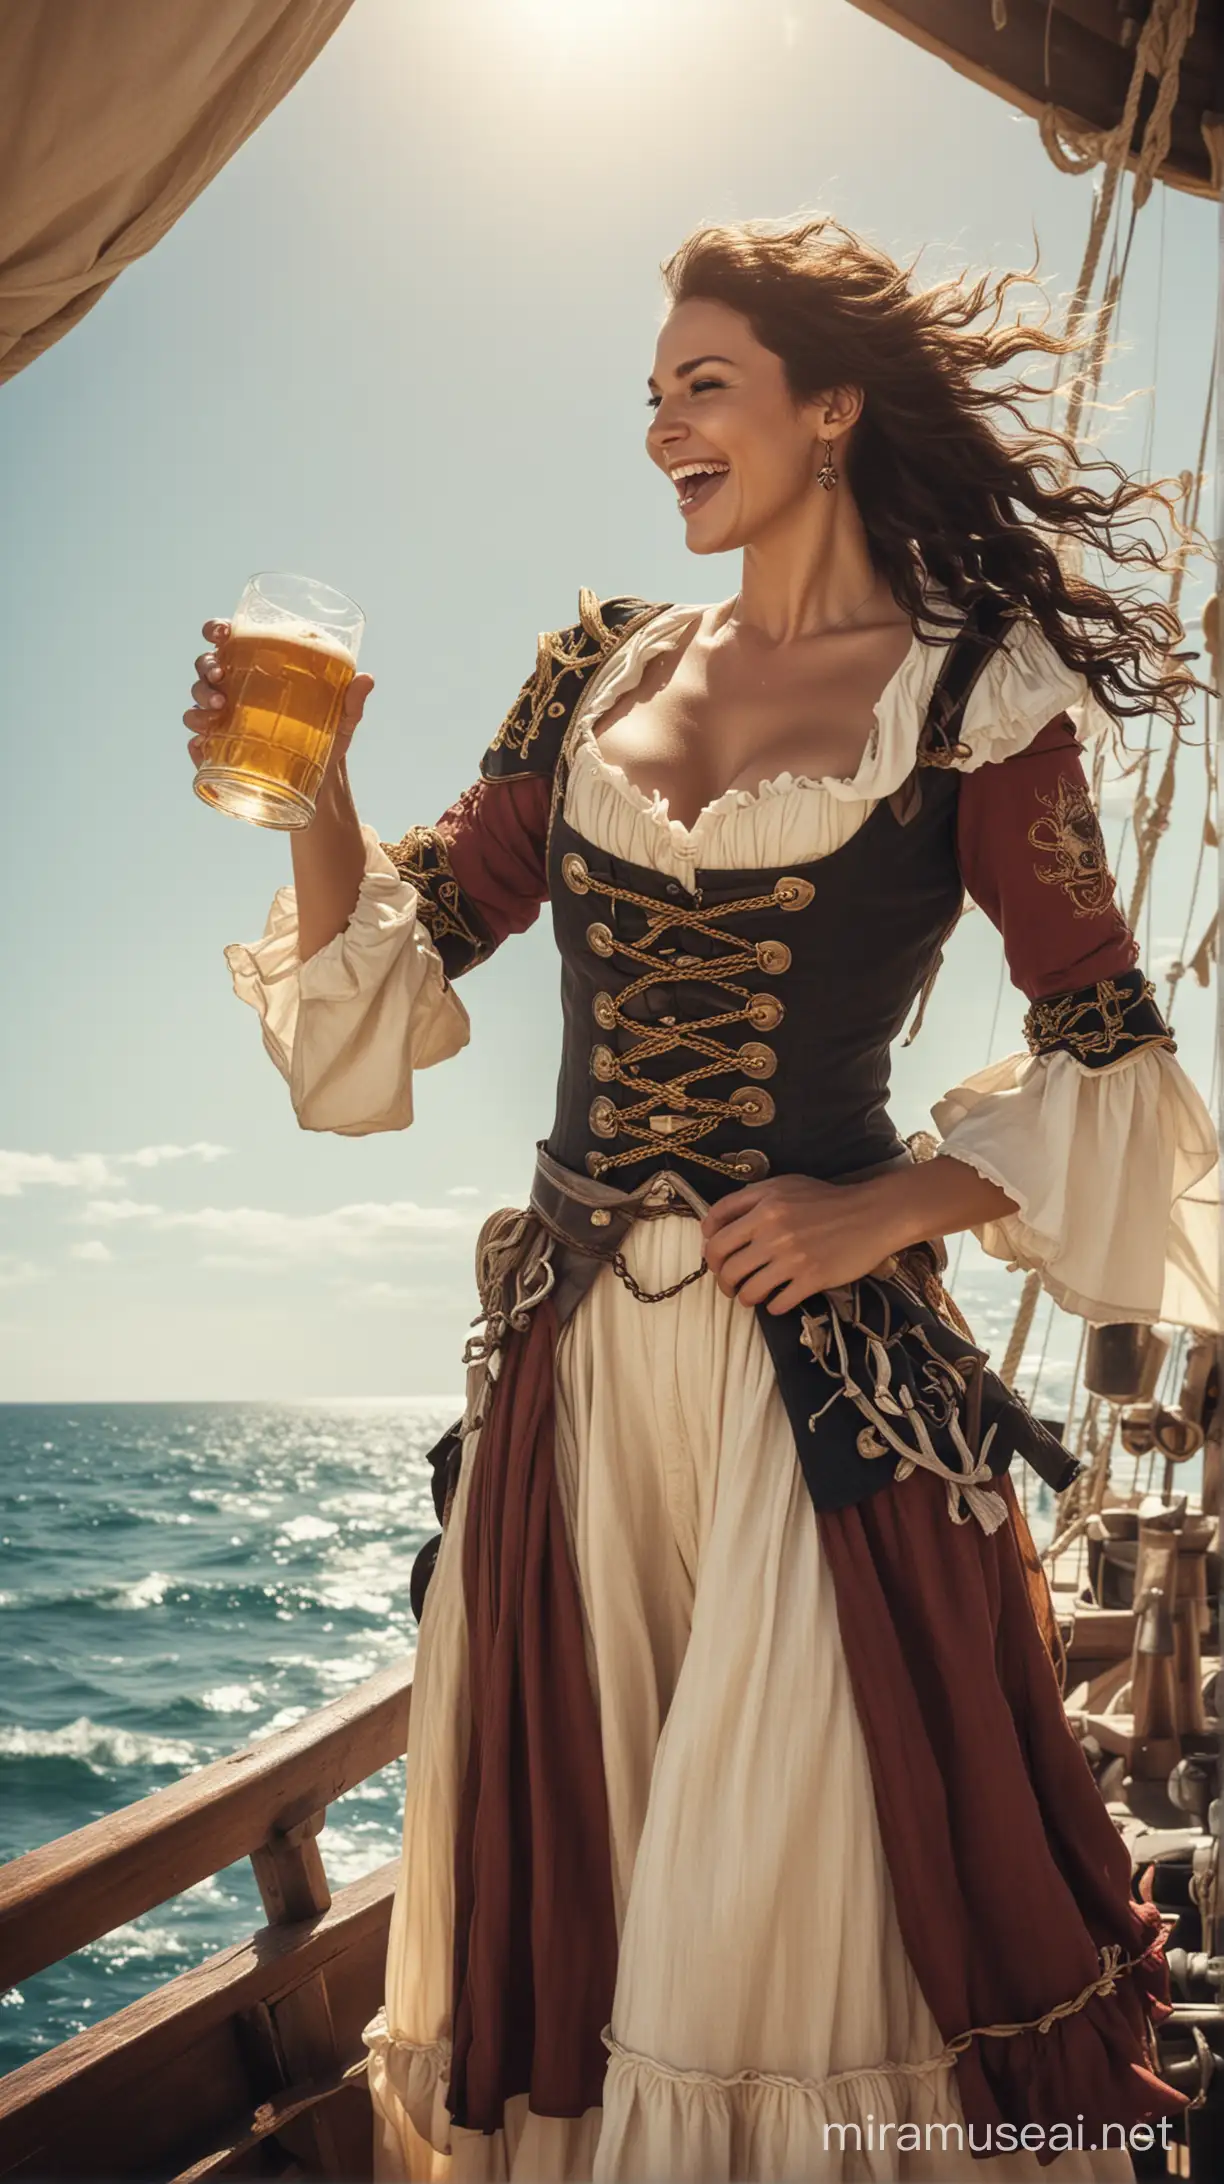 Gol D. Roger holding a beer, on a pirate ship, sunny day, wind, laughing, correct anatomy, toned body, wearing a noble pirate dress